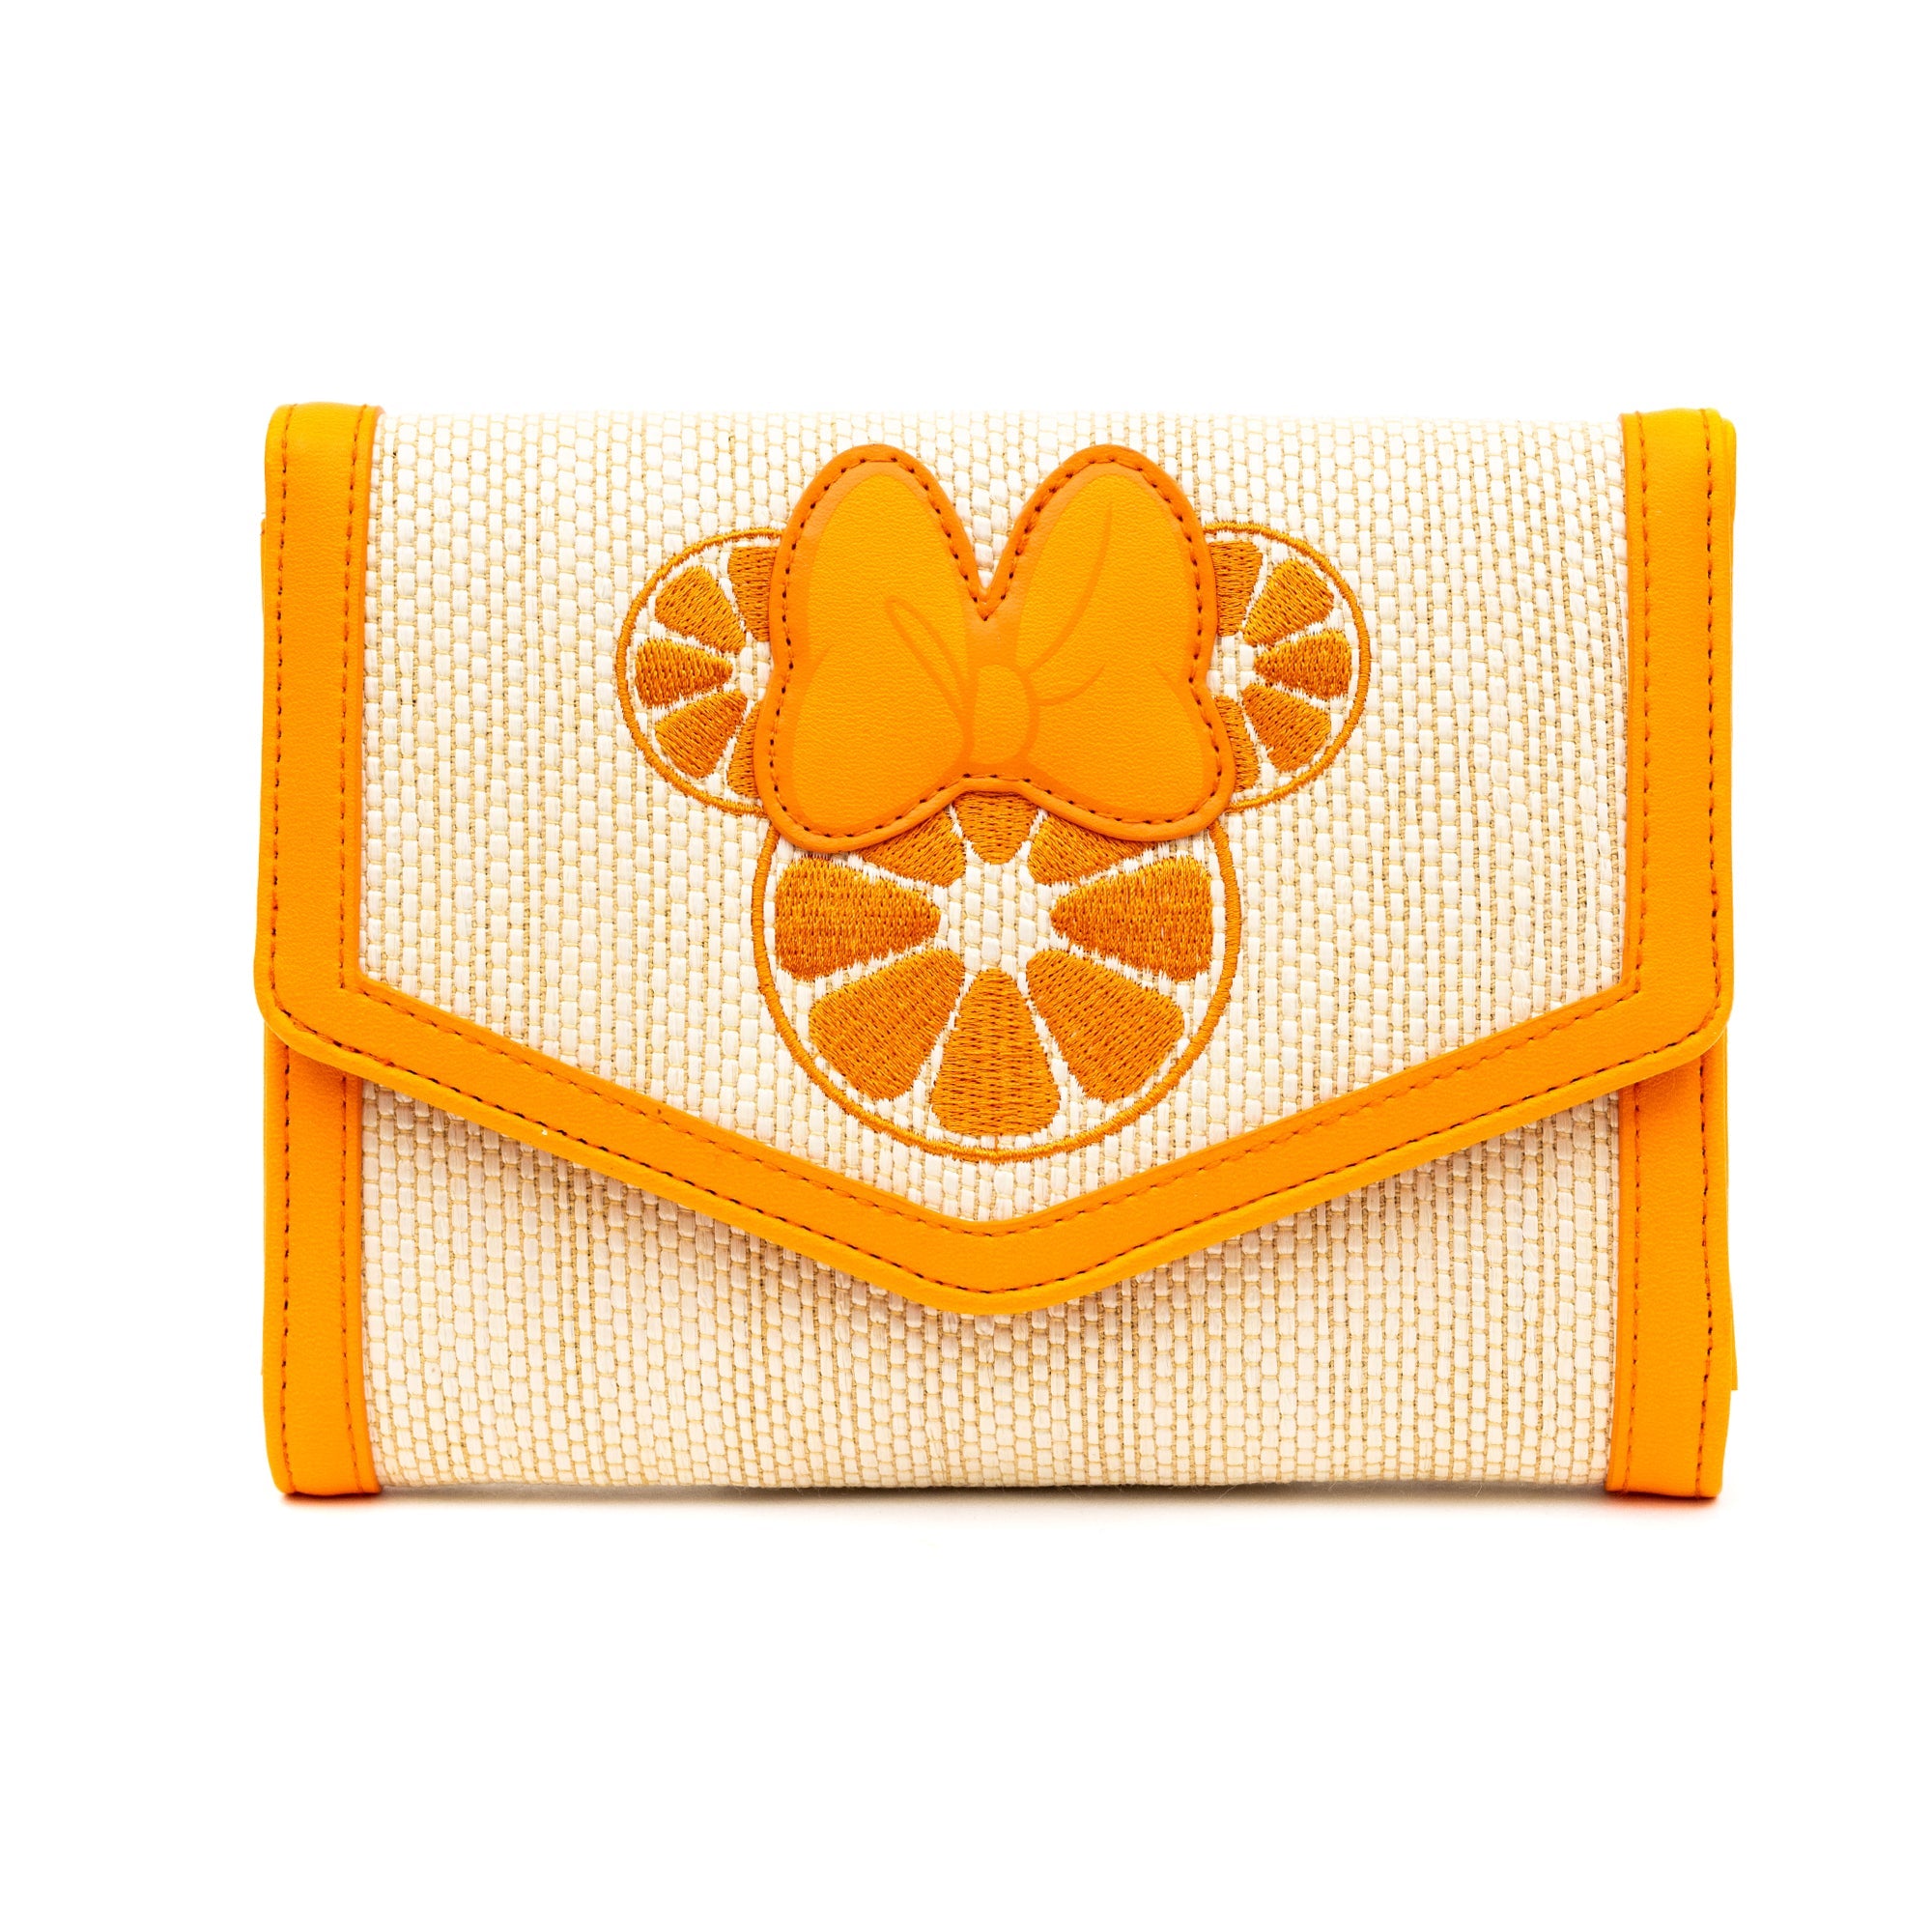 Disney Minnie Mouse Embroidered Citrus Ears with Bow Horizontal Fold Over Crossbody Bag